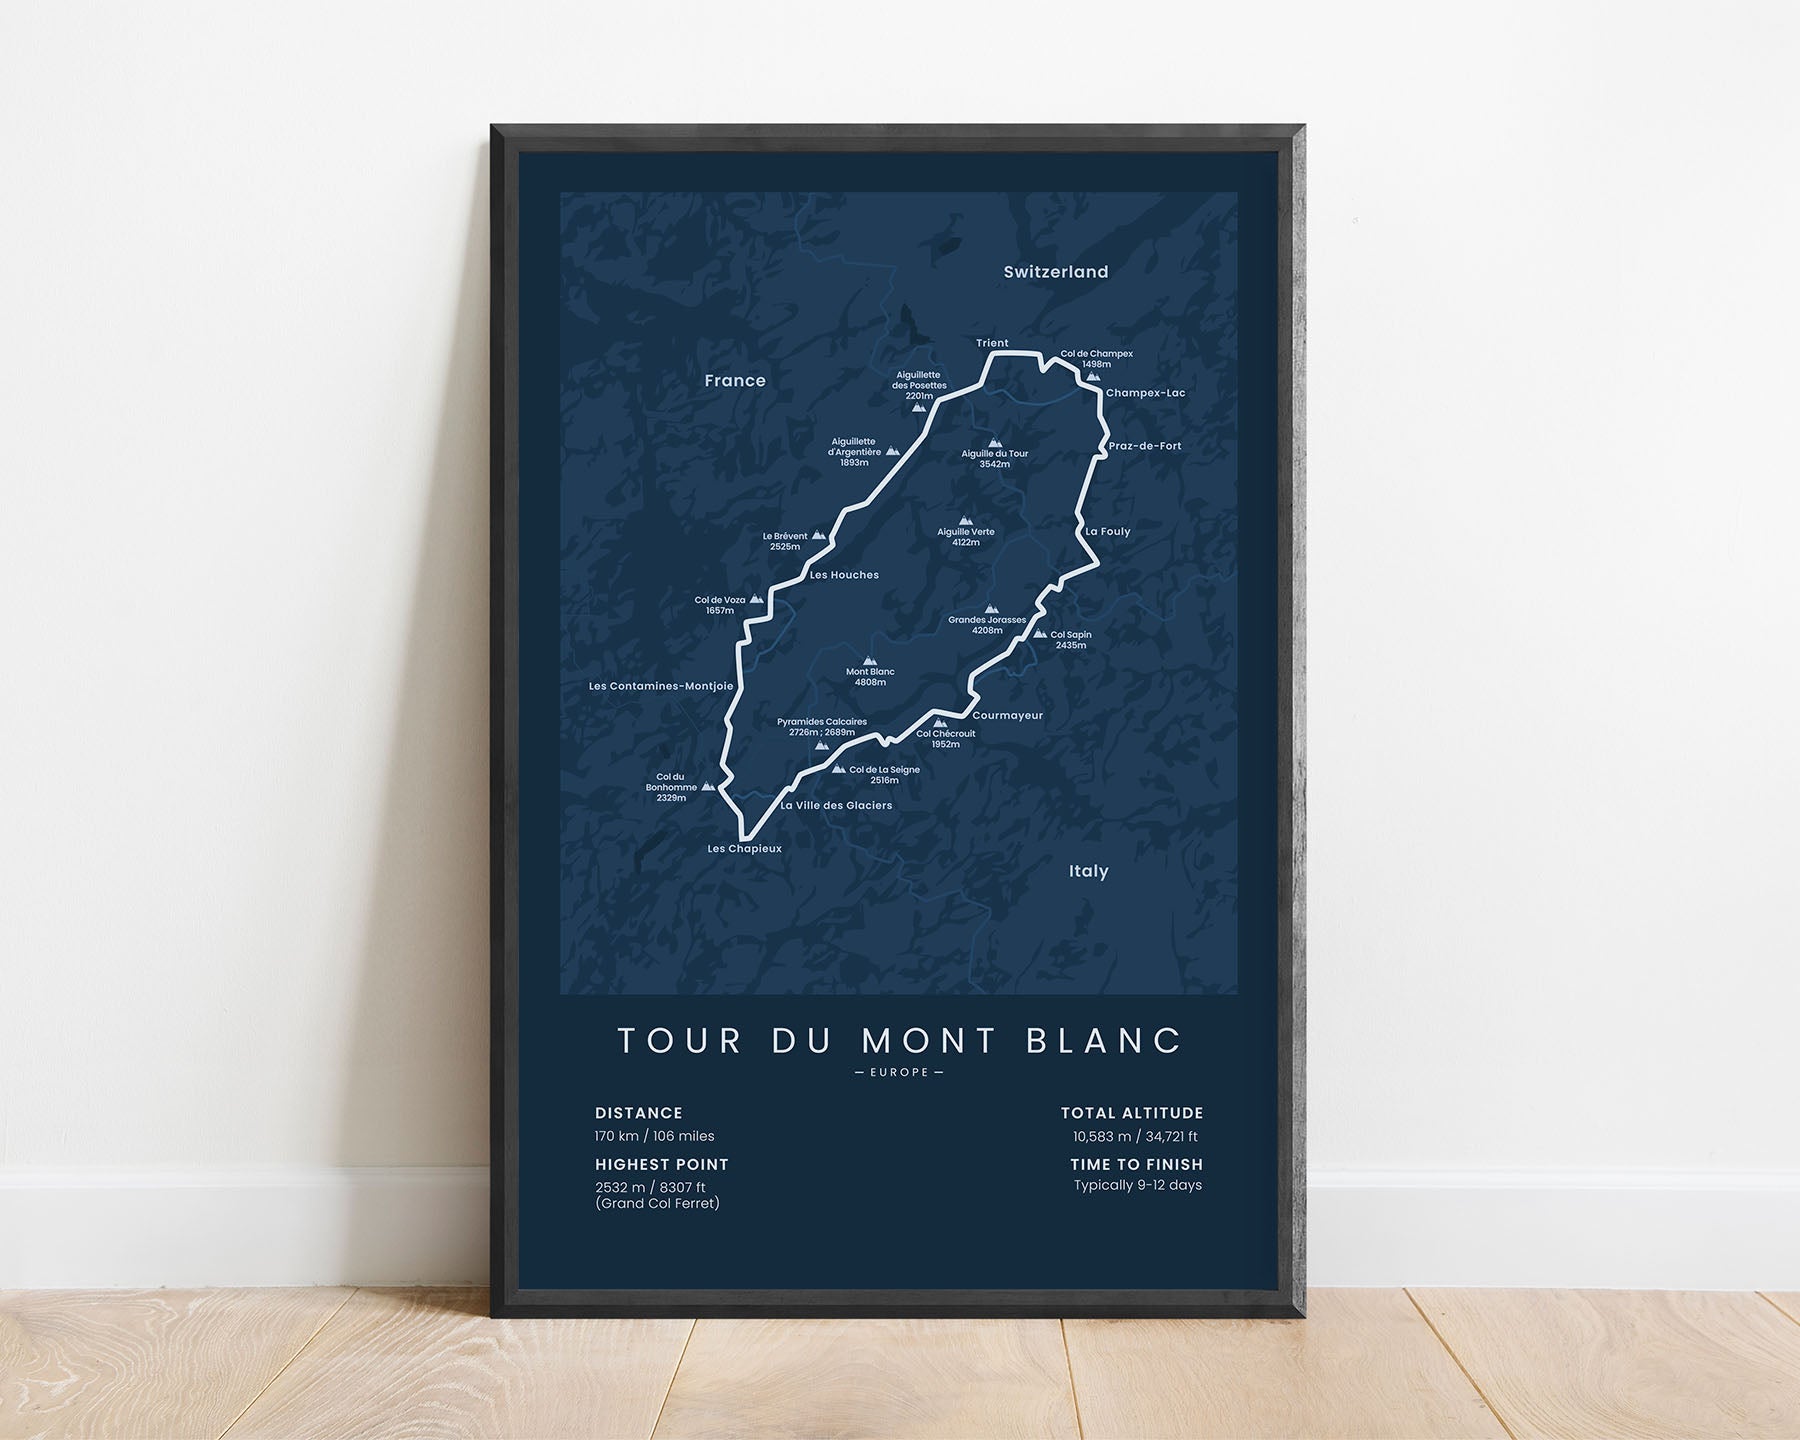 Ultra Tour du Mont Blanc running trail map wall art with blue background